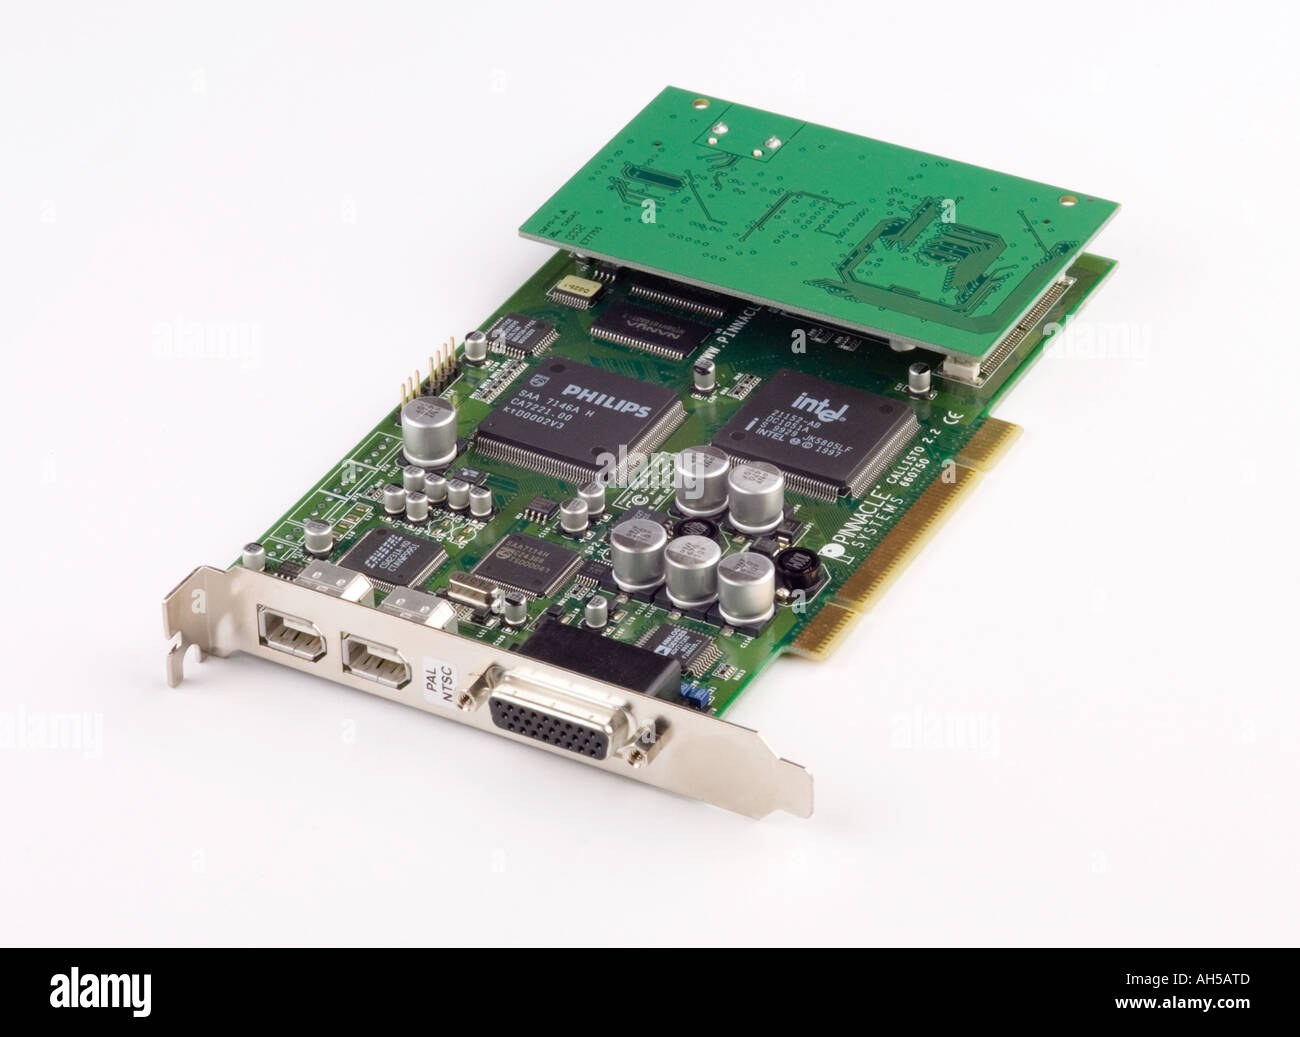 A video graphics card for a PC based computer showing various electronic components Stock Photo